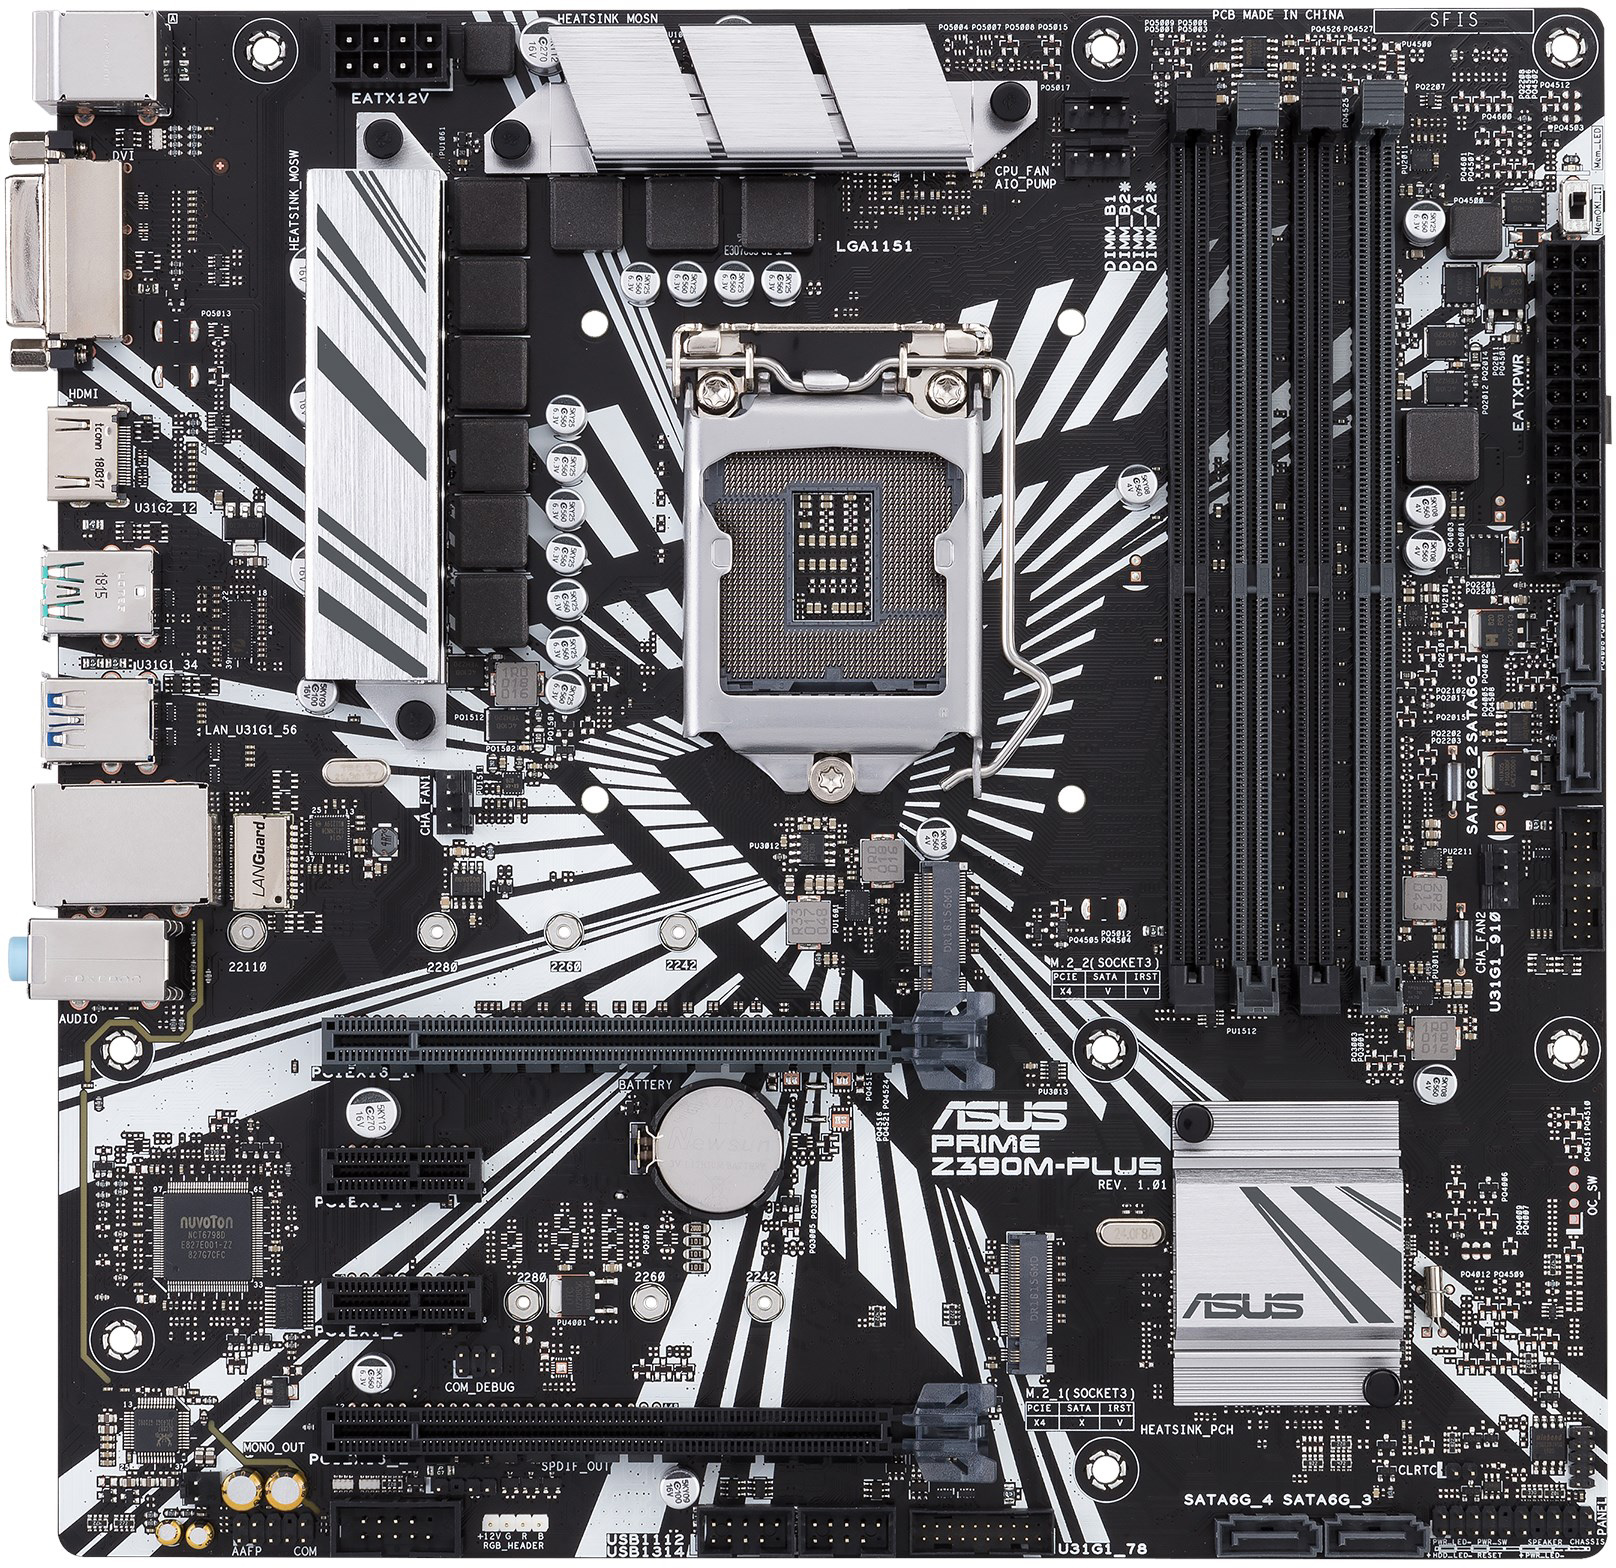 Asus Prime Z390M-Plus - Motherboard Specifications On MotherboardDB